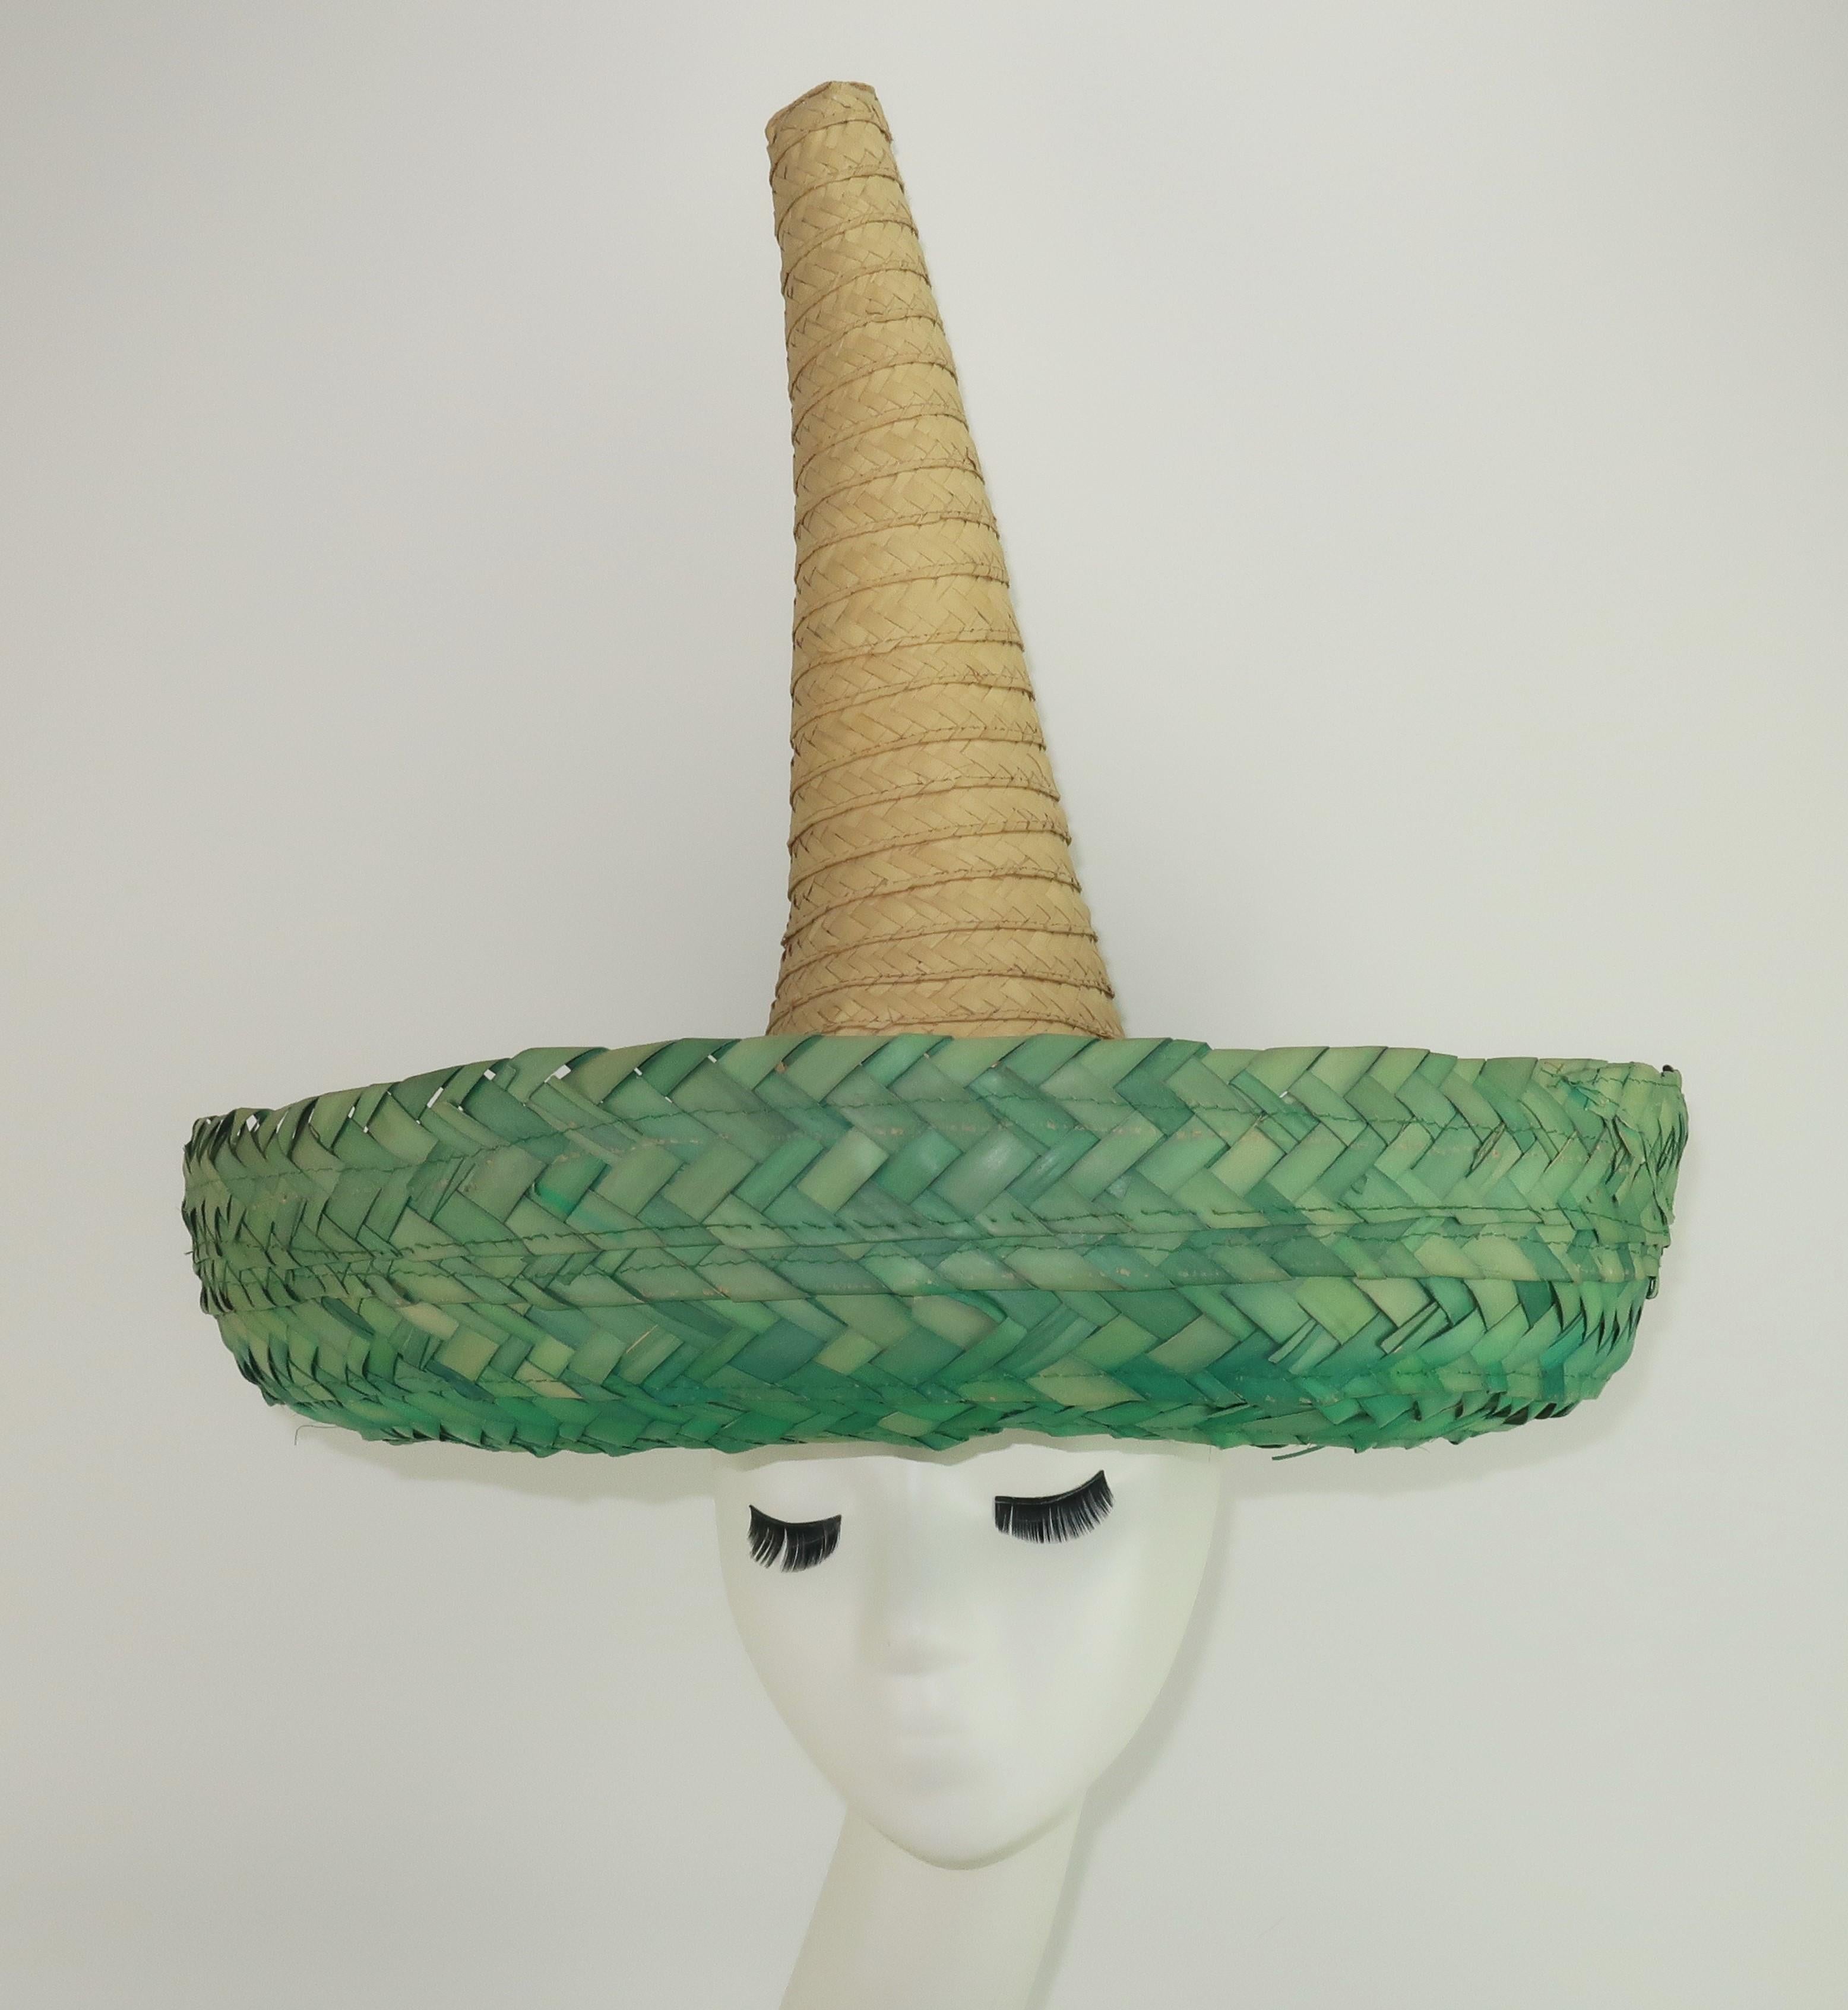 1960's novelty straw Mexican sombrero hat with a sky high crown and rounded green brim.  It is the perfect accessory for a poolside party and for those that enjoy a touch of humor in their vintage.  Marked 'Mexico' on inner rim.
CONDITION
Good